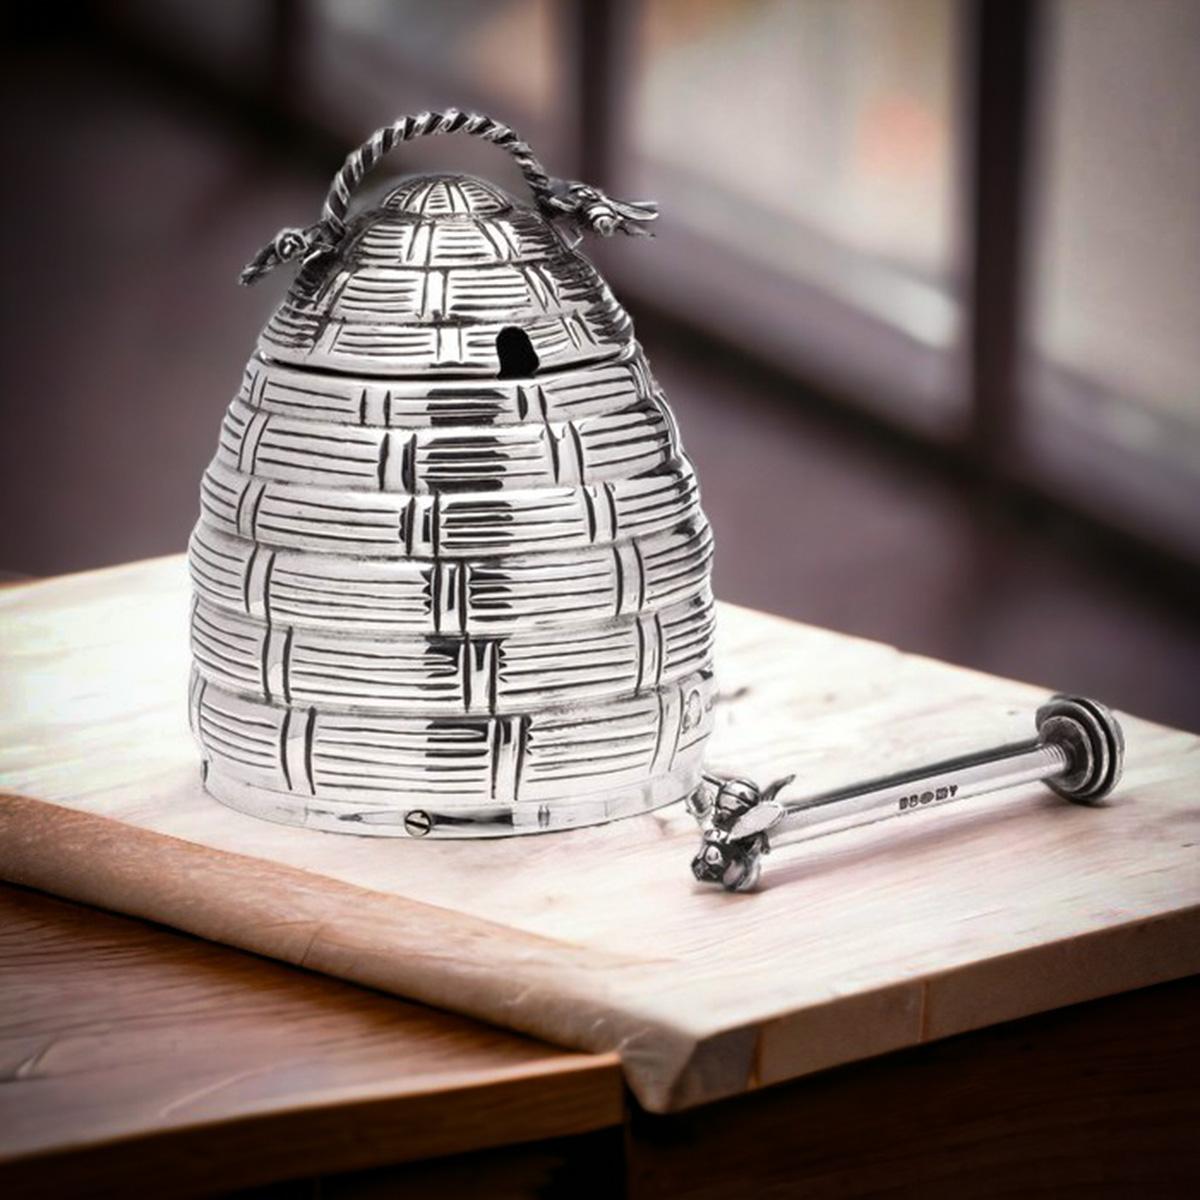 Sterling 925 silver beehive honey pot with a spoon. 
Made in 2022, spoon made in 2021. 

The beehive honey pot, adorned with decorative bees, features two base holes for smooth honey flow and comes with a lid and handle. Although the glass part is